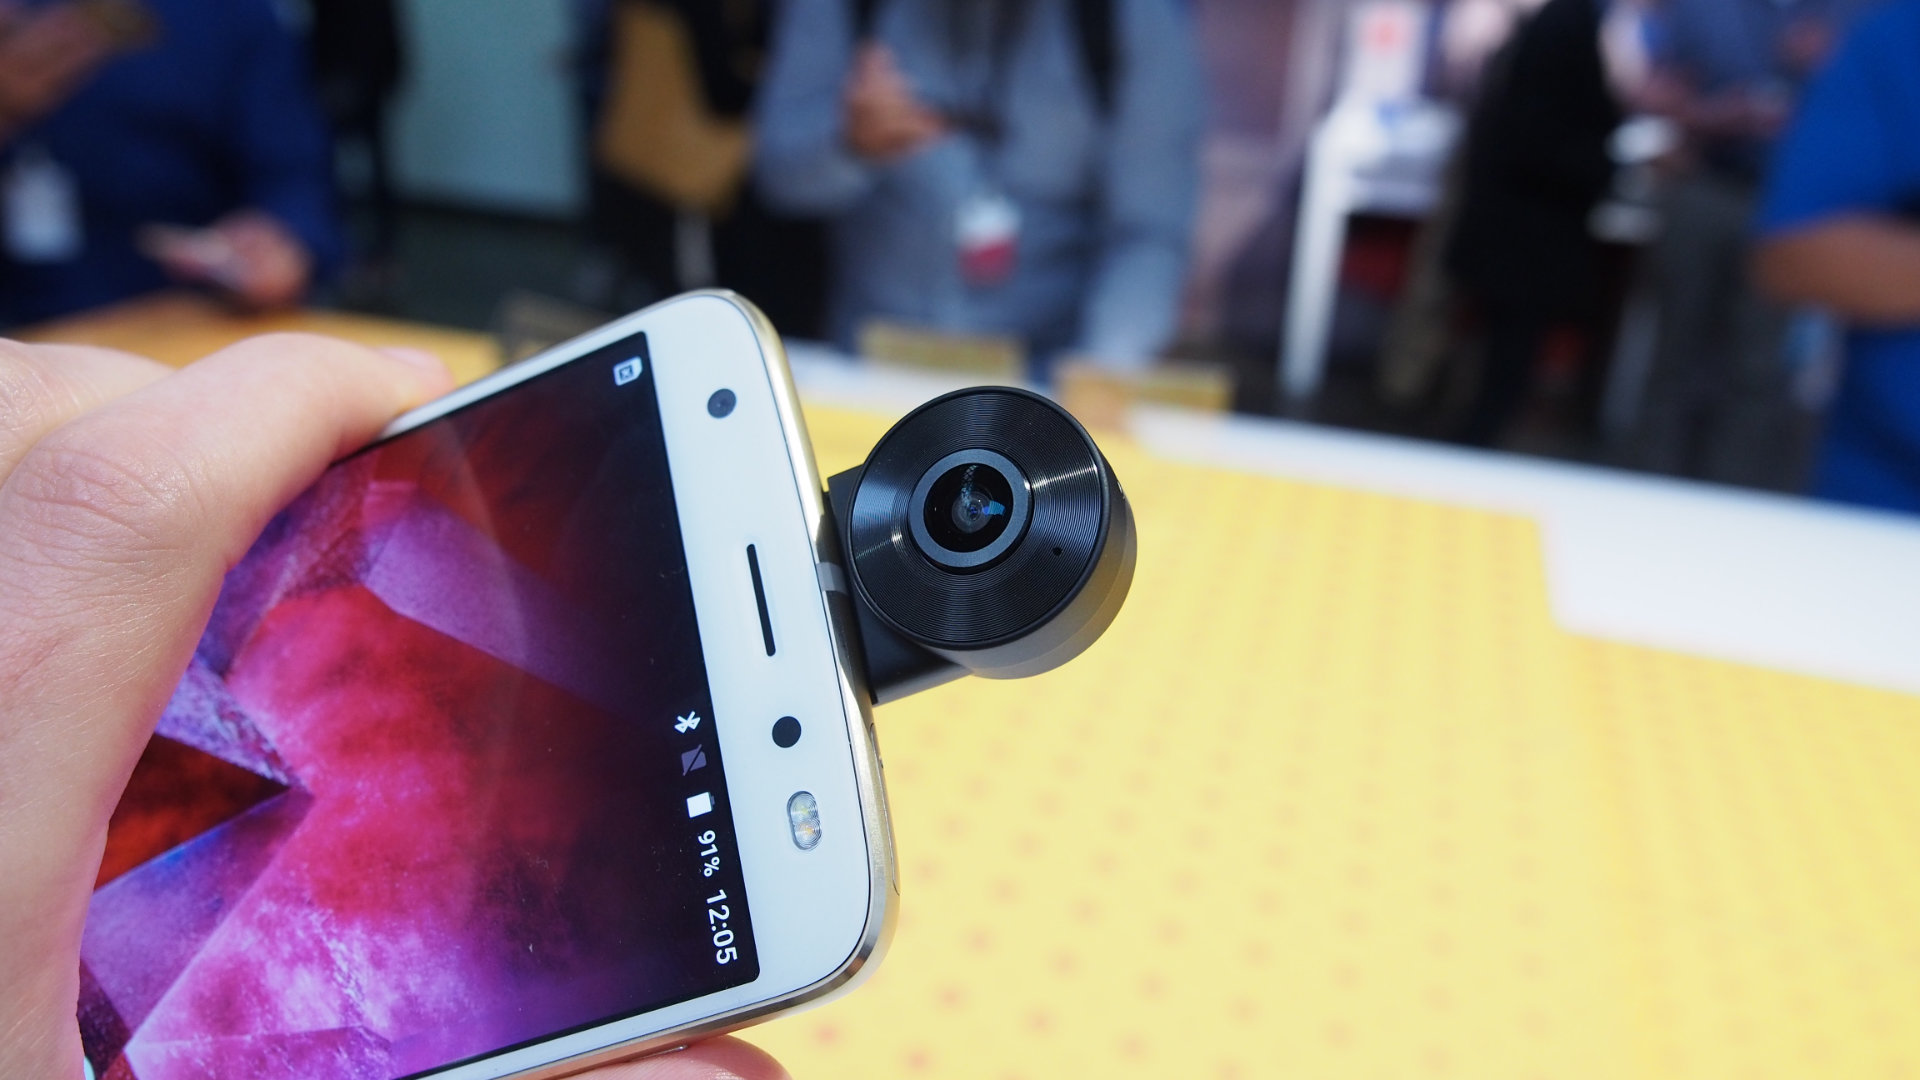 This 360-degree camera turns your Moto Z phone into a video powerhouse